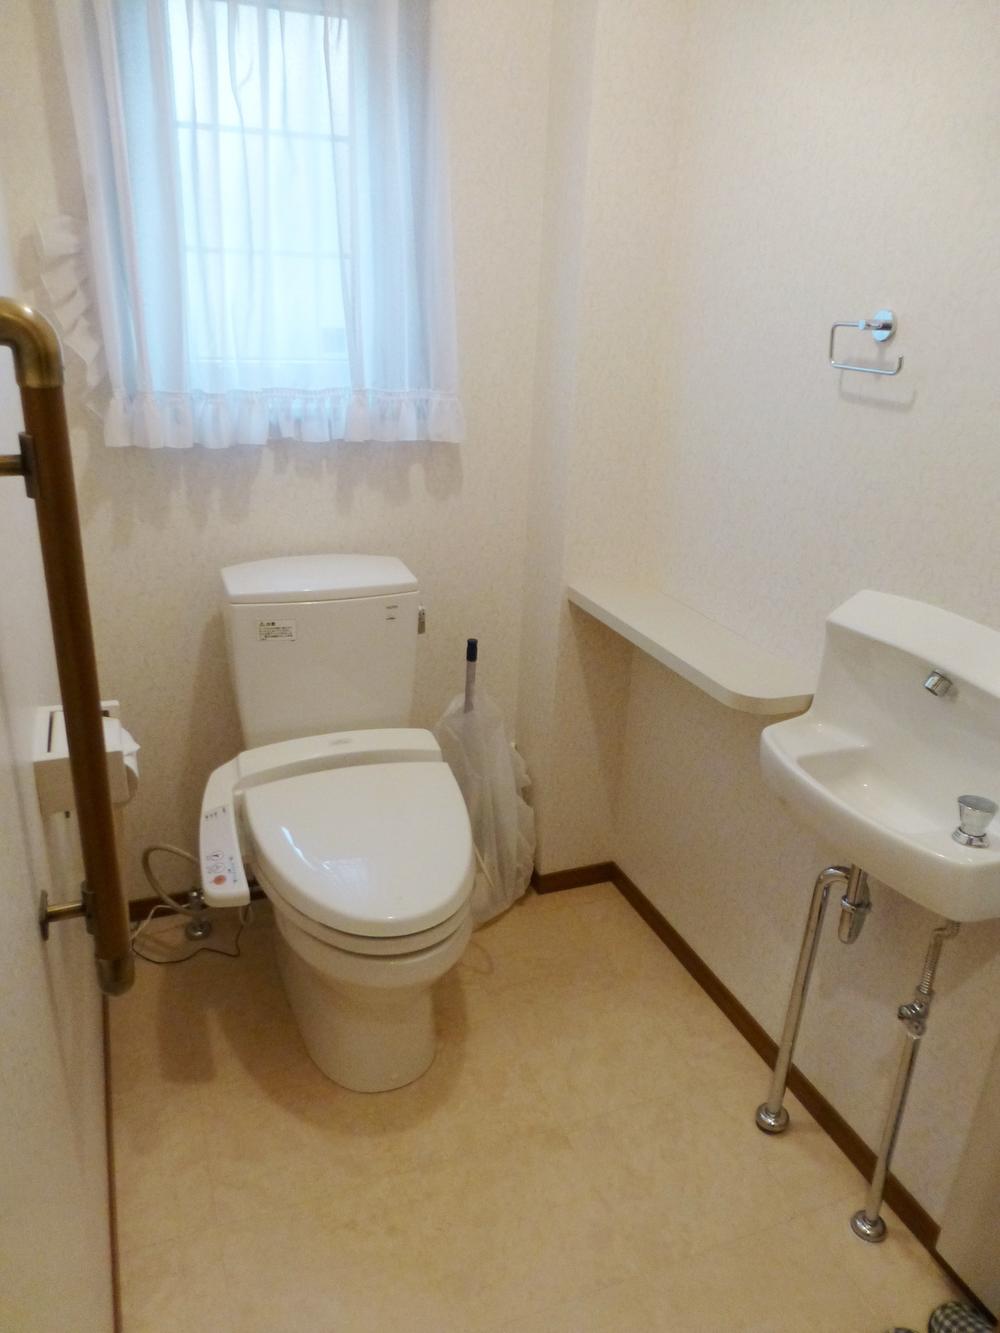 Toilet. It is L-shaped with a handrail to support the Standing sitting. 